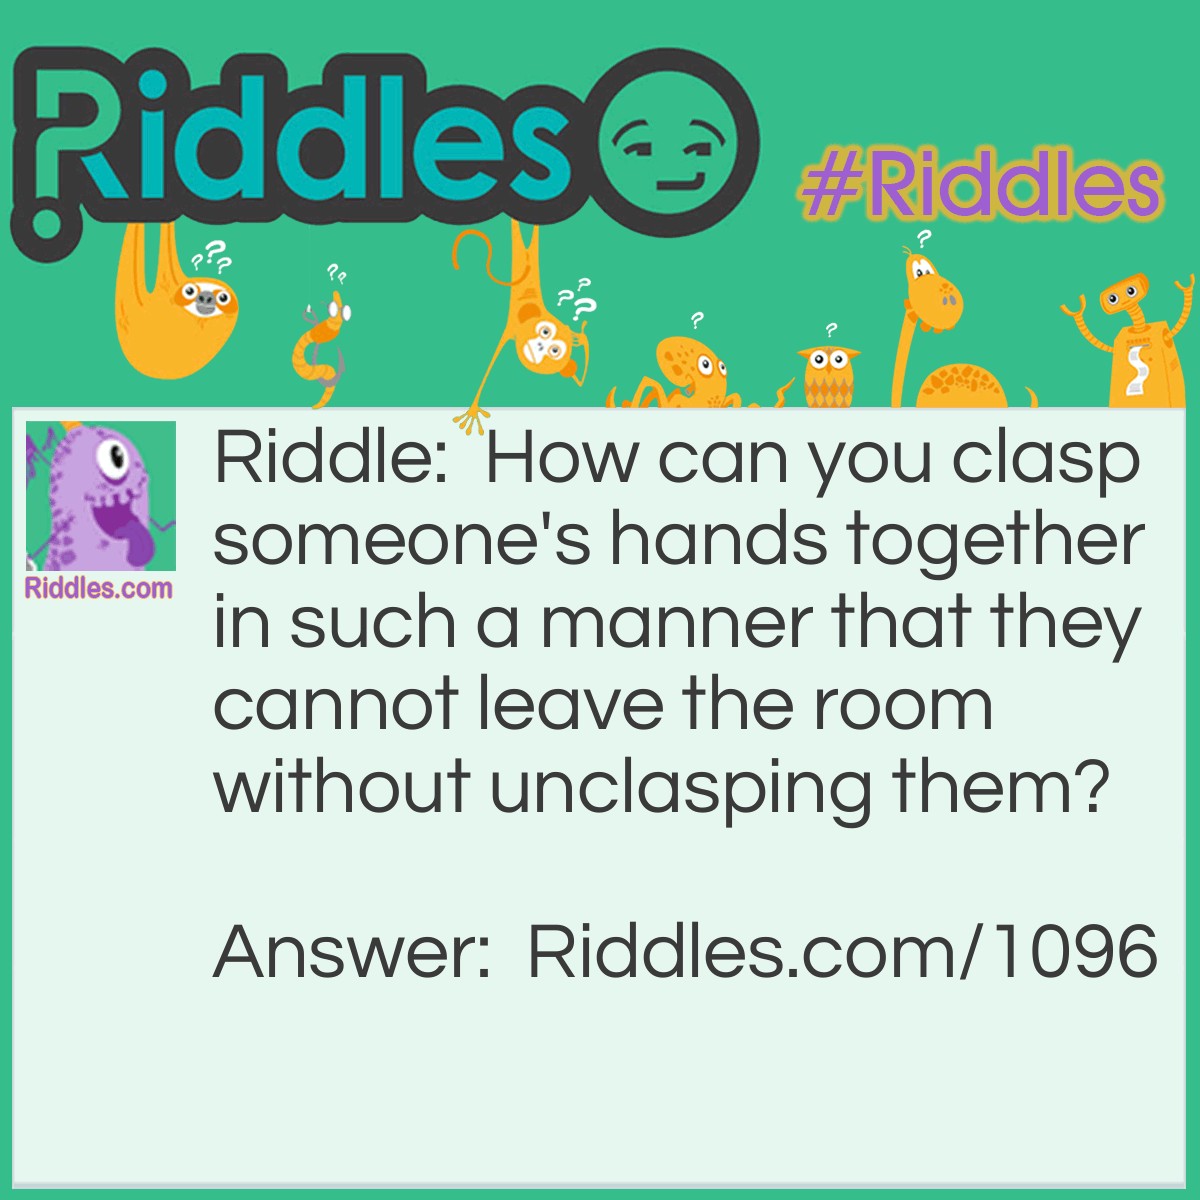 Riddle: How can you clasp someone's hands together in such a manner that they cannot leave the room without unclasping them? Answer: Put their hands around a stationary object in the room, which will keep them from leaving the room unless they open their hands.